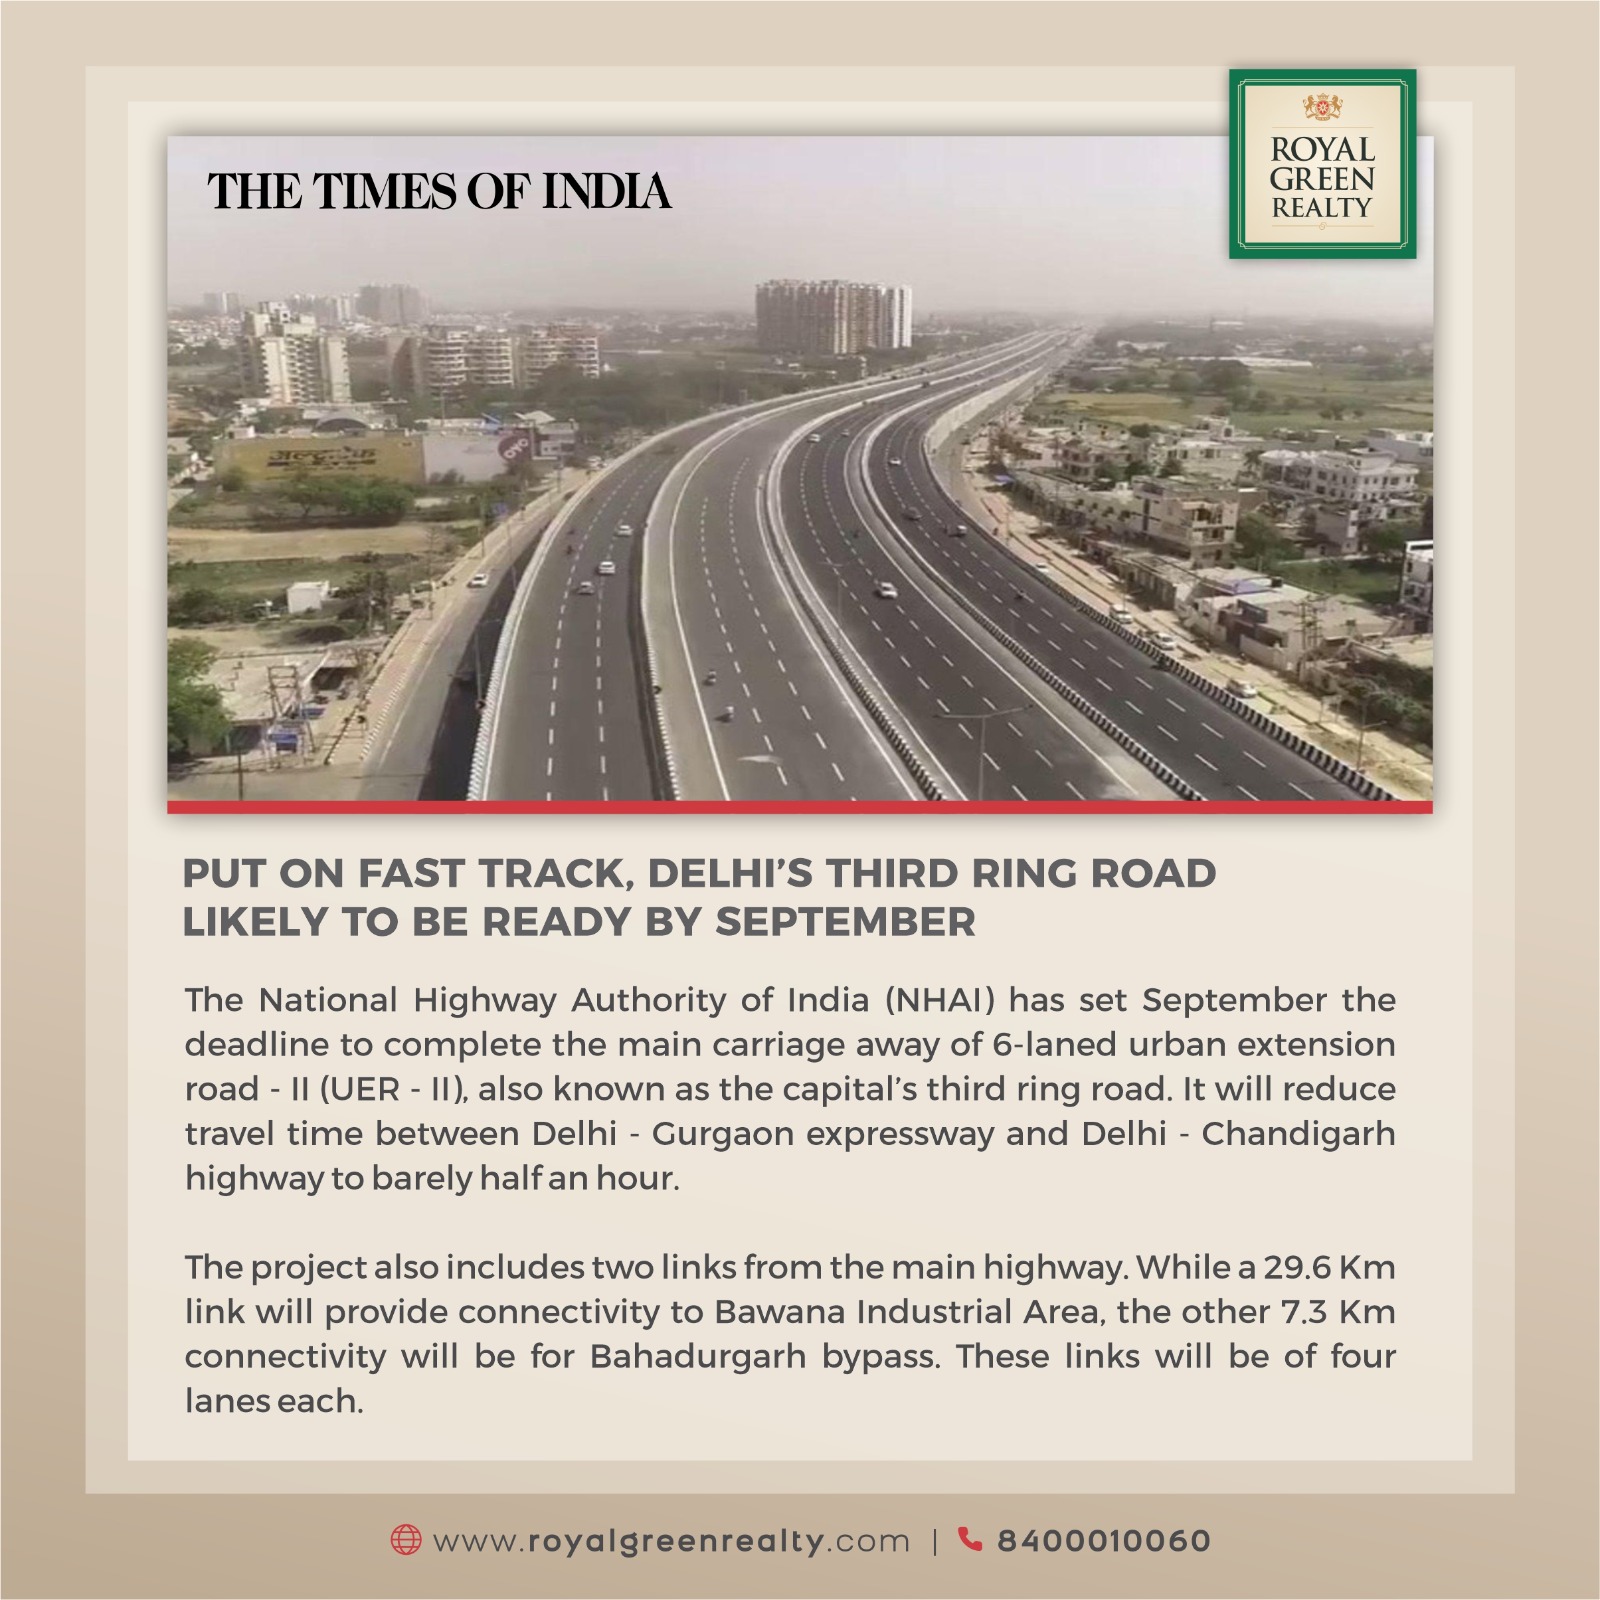 Put on fast track, Delhi's thrid ring road likely to be ready by september